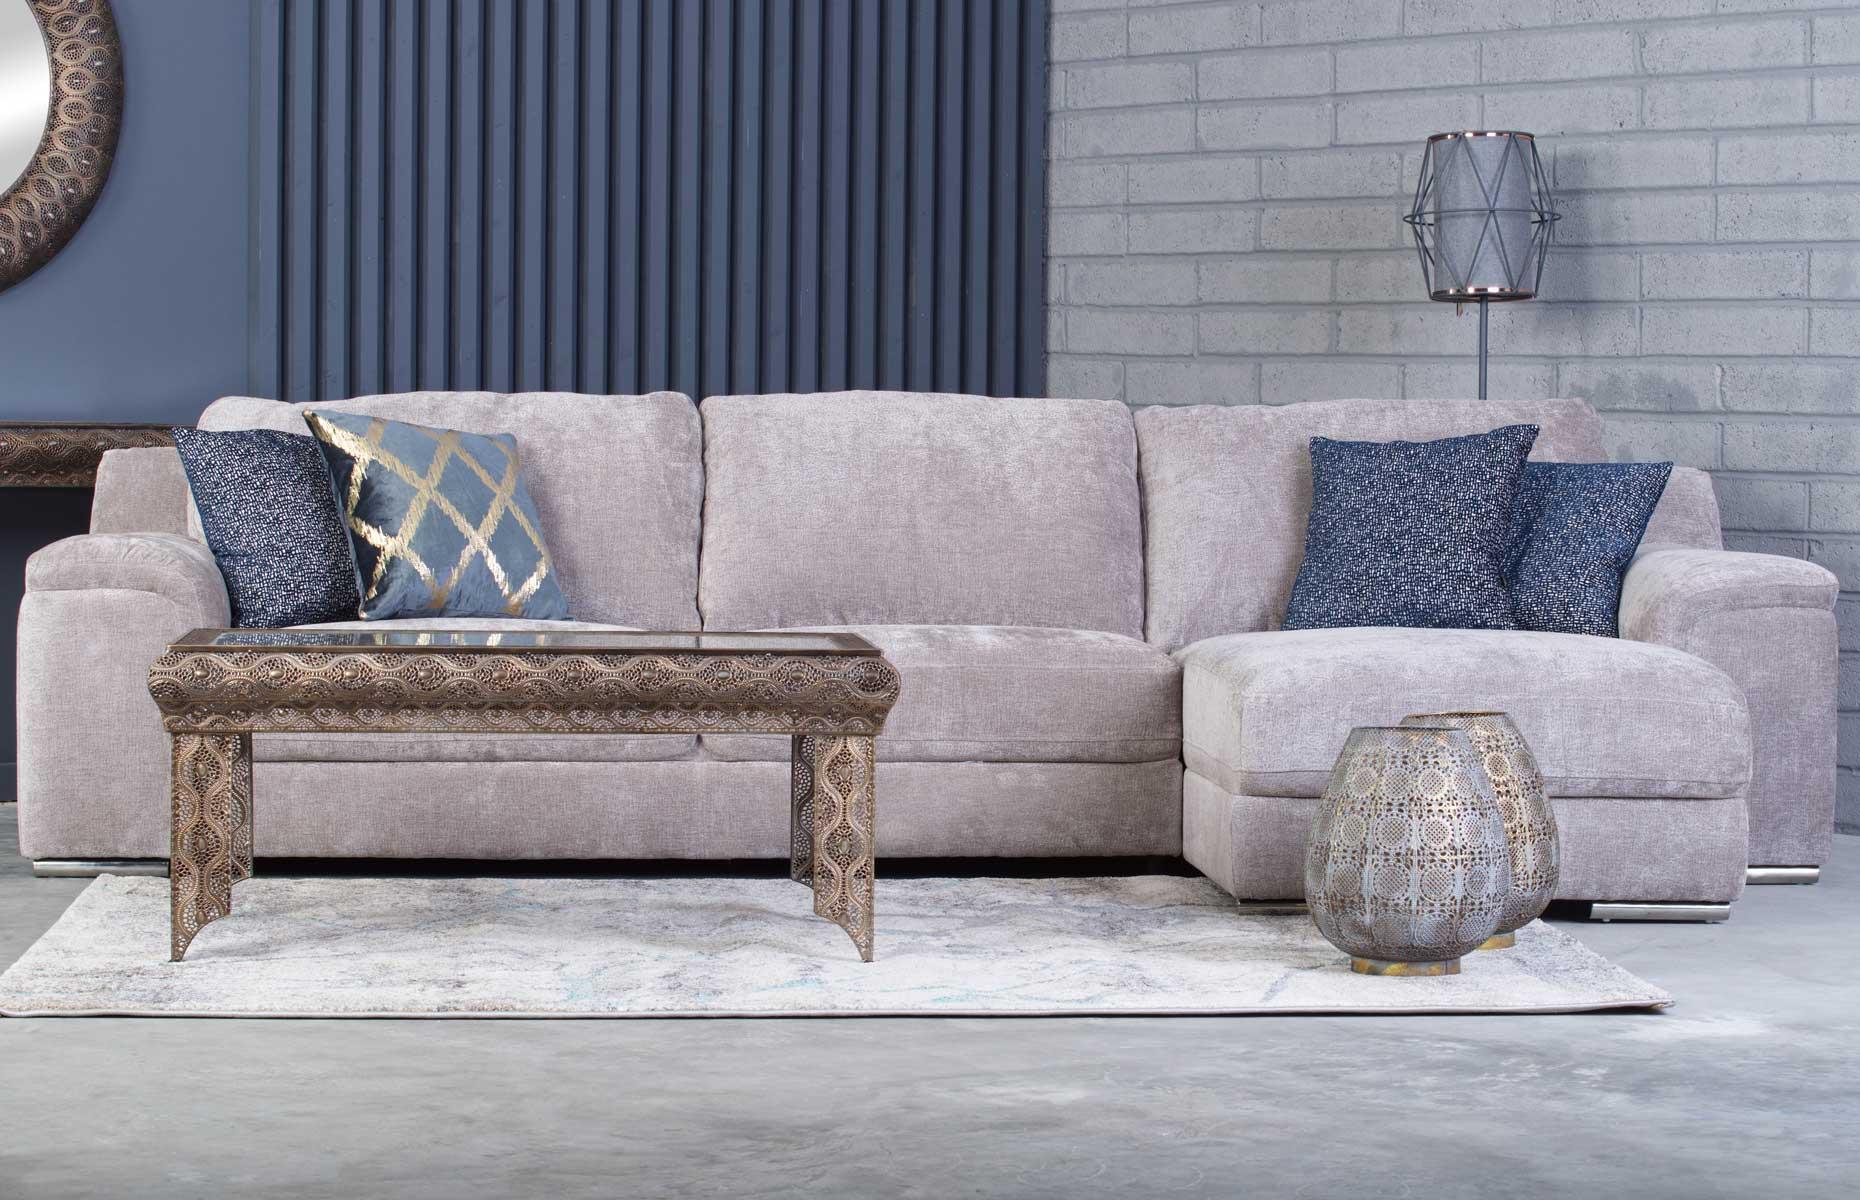 <p>There's nothing so essential in <a href="https://www.loveproperty.com/gallerylist/69698/living-room-ideas-for-every-style-and-budget?page=1">the living room</a> as a cozy sofa to cuddle up on with a good book. It's one of the few things in a house where it's absolutely essential that it works even better than it looks. Whether you love a classic look or a modern arrangement, if you love your sofa, you're doing well.​</p>